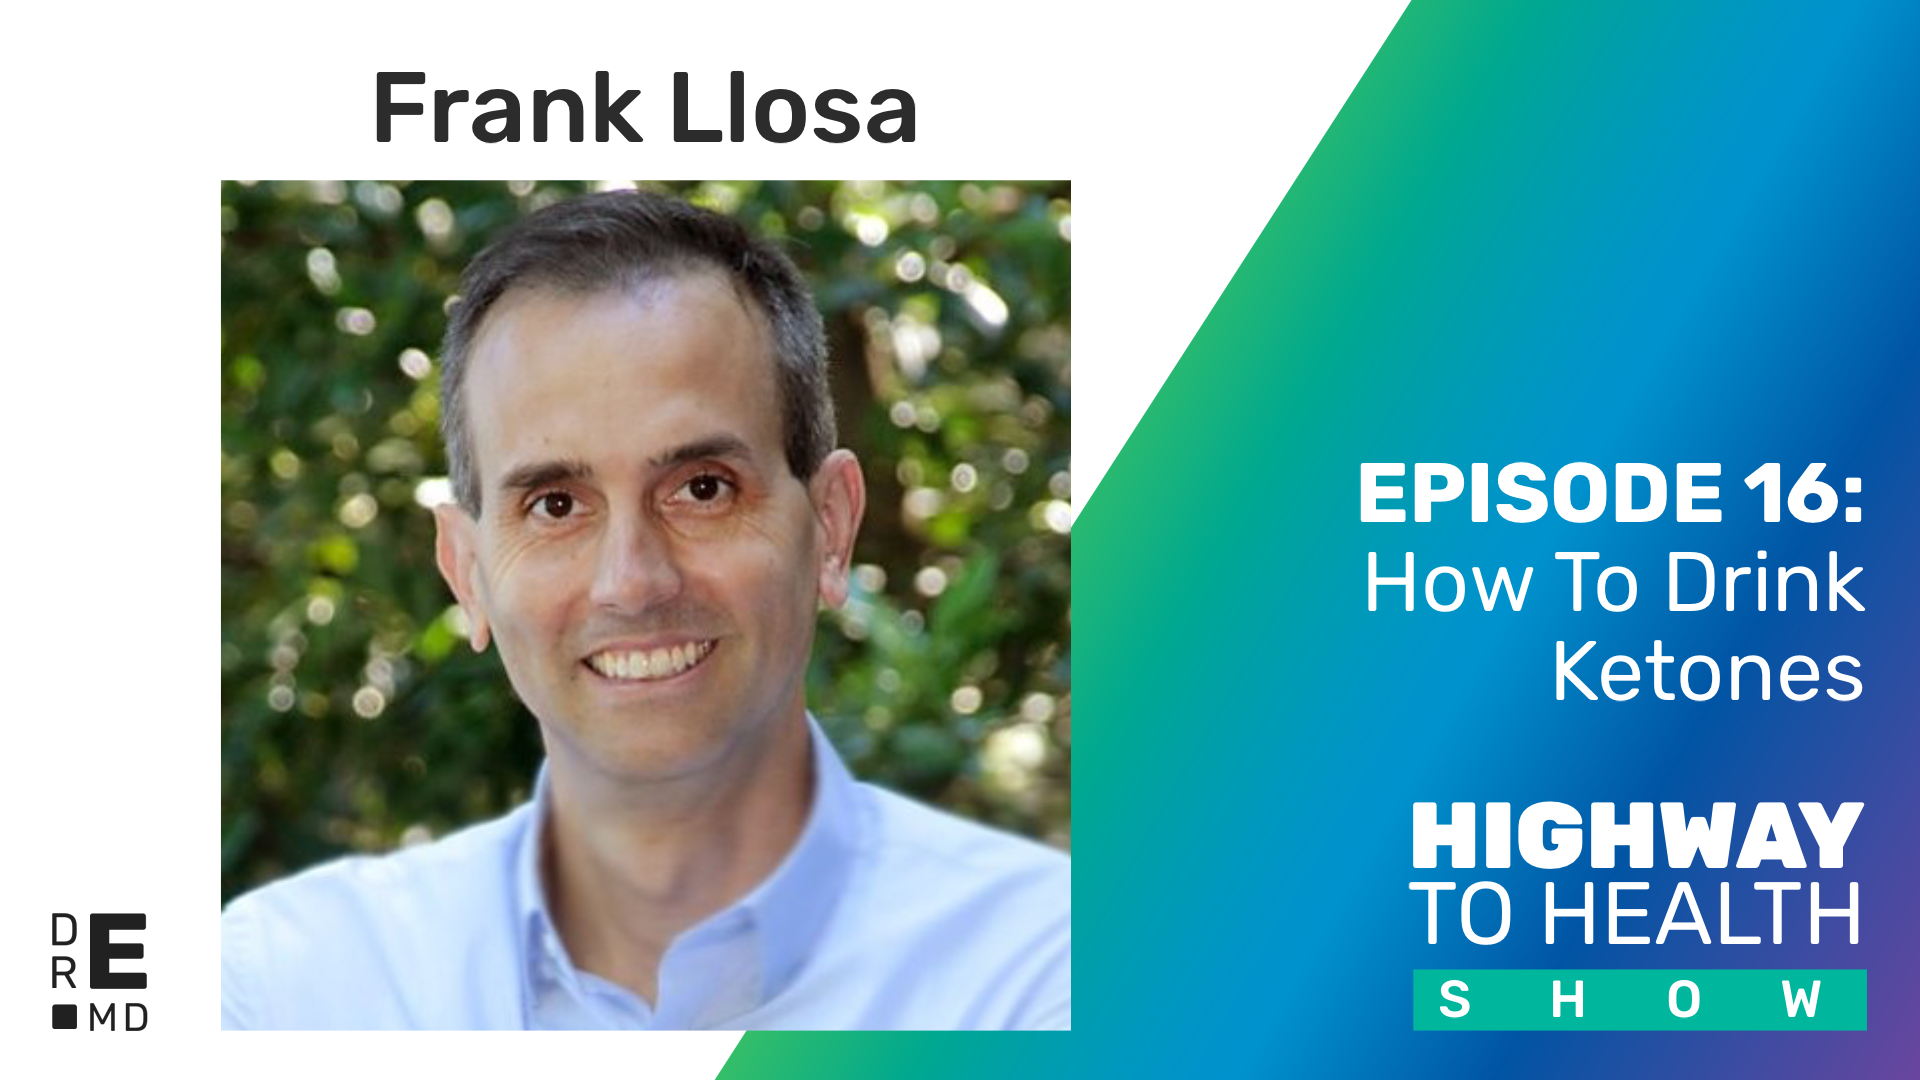 Highway to Health: Ep 16 - Frank Llosa